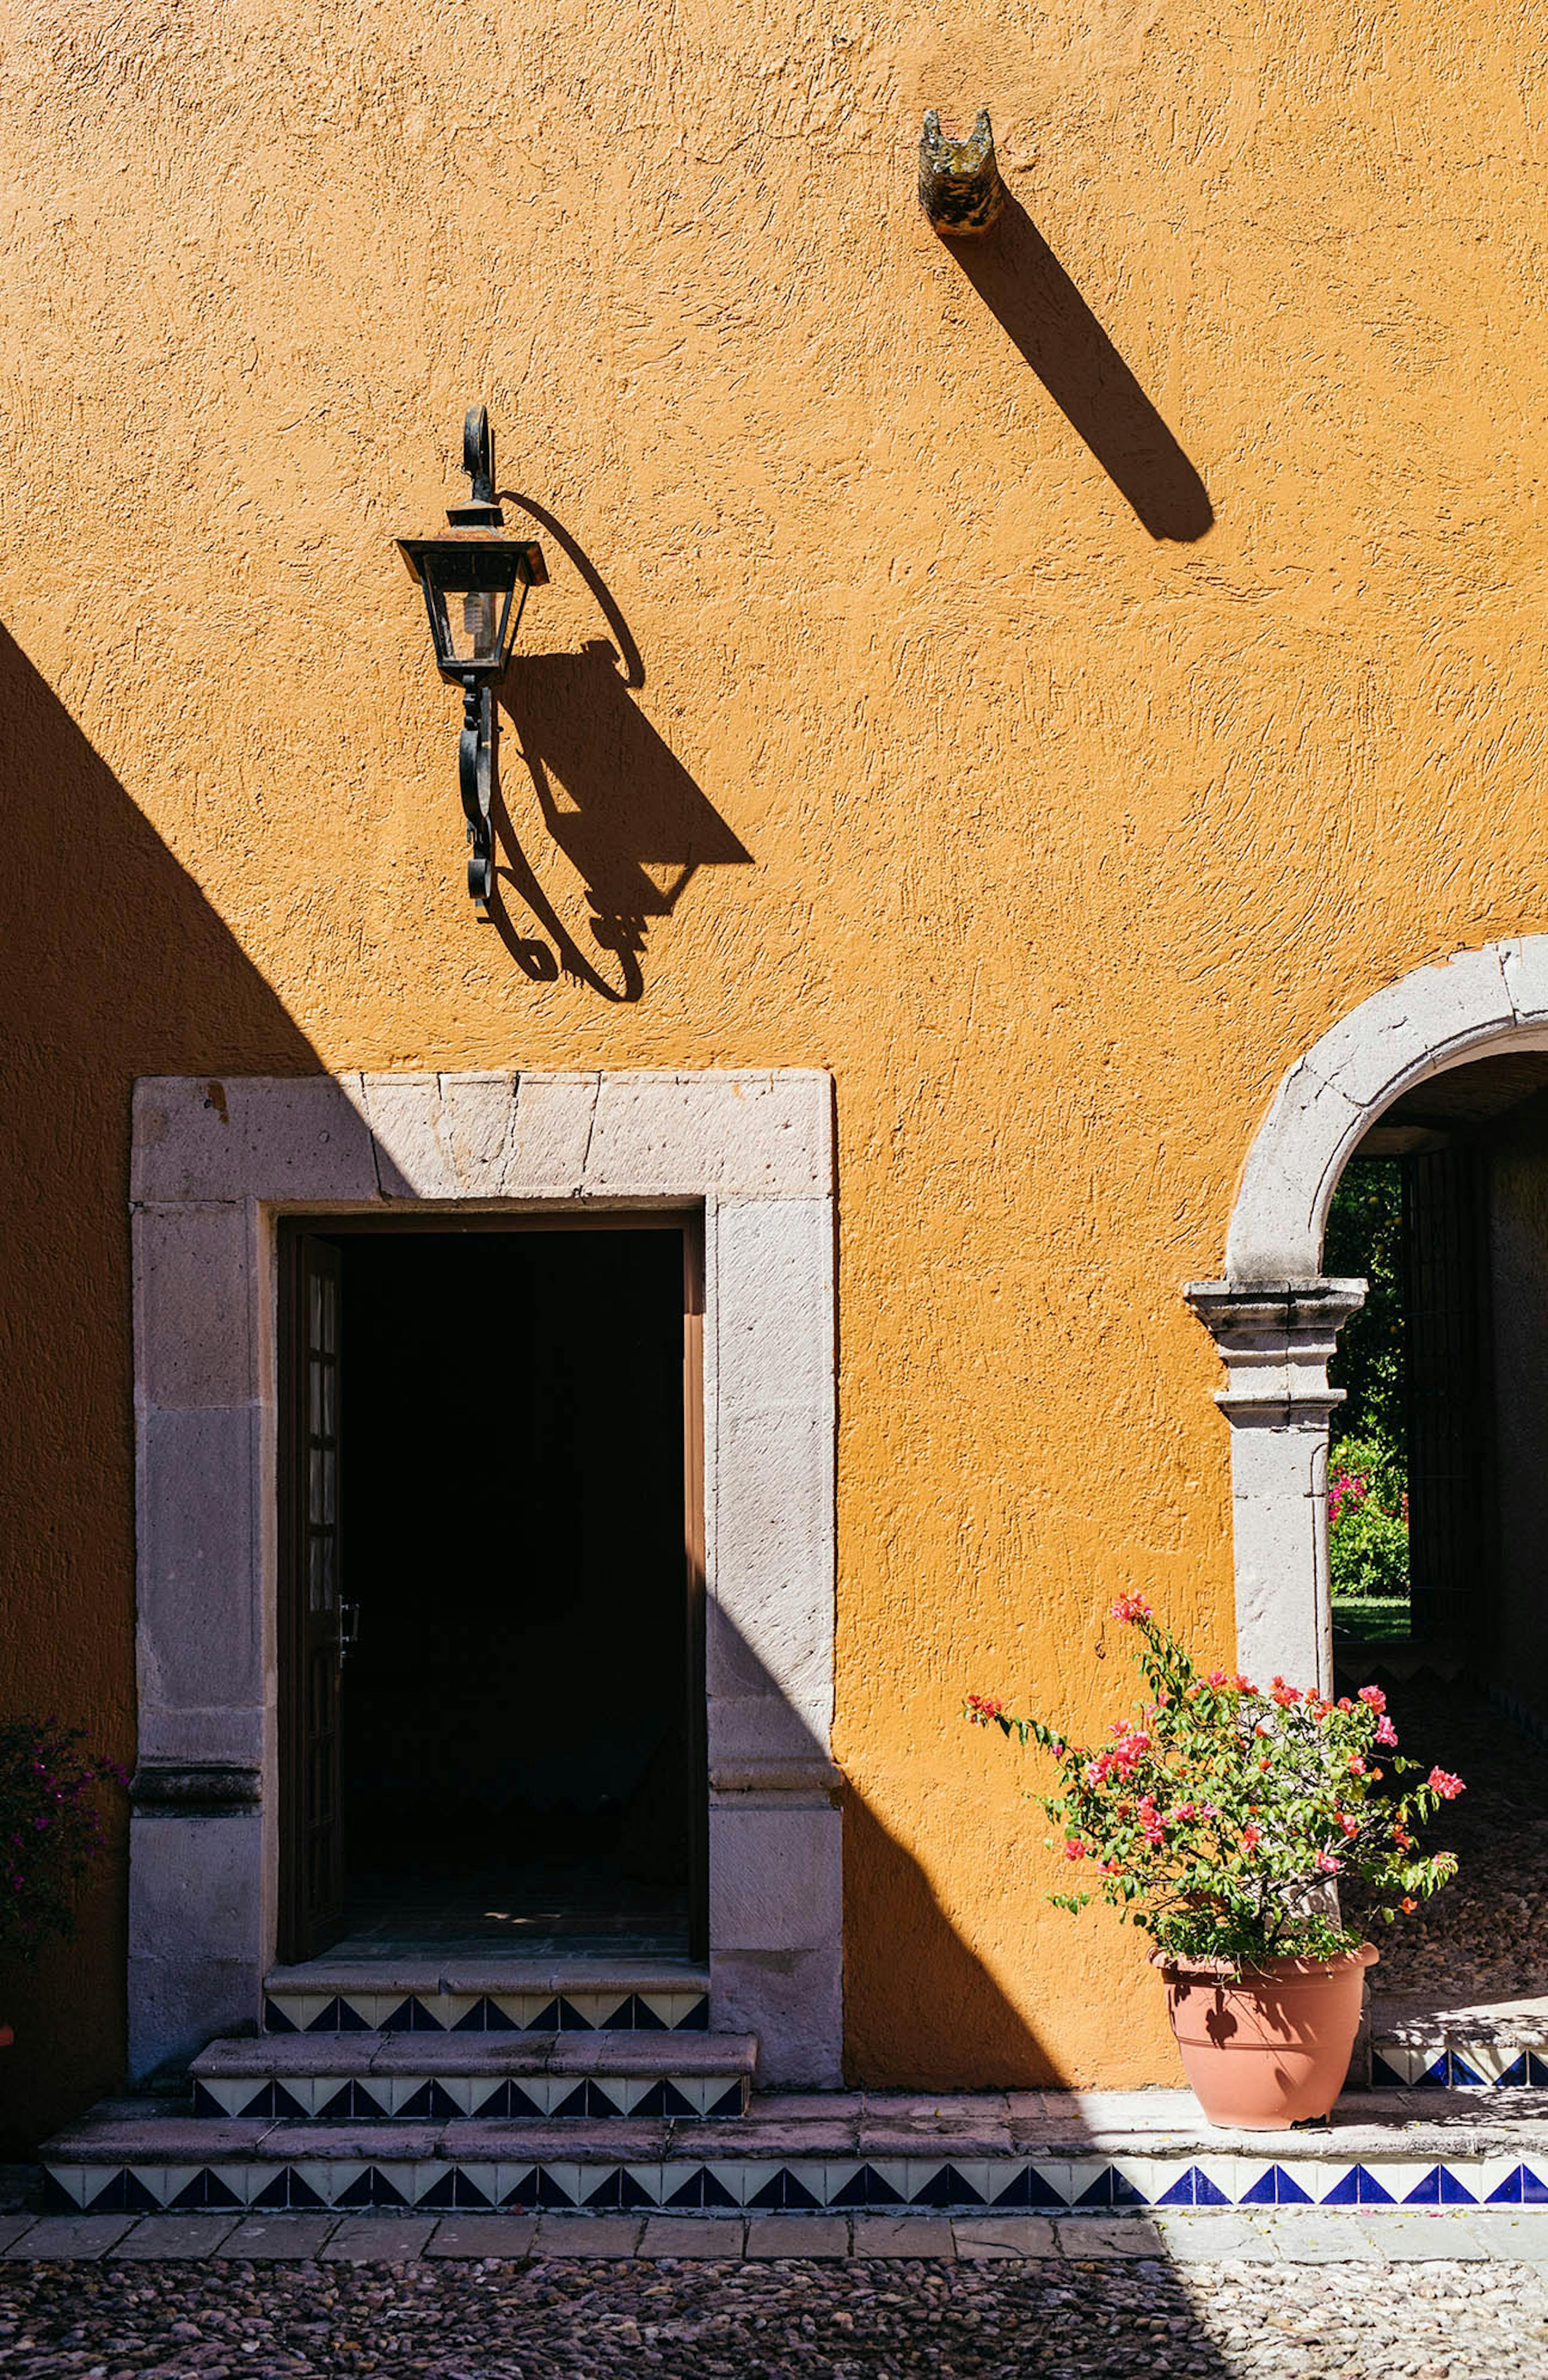 La Gavilana, located in the shadow of the Tequila Volcano in Jalisco, is the Hacienda owned by the Gallardo Family since the 17th century and is now the Brand home for Volcàn de mi Tierra. © Volcan De Mi Tierra